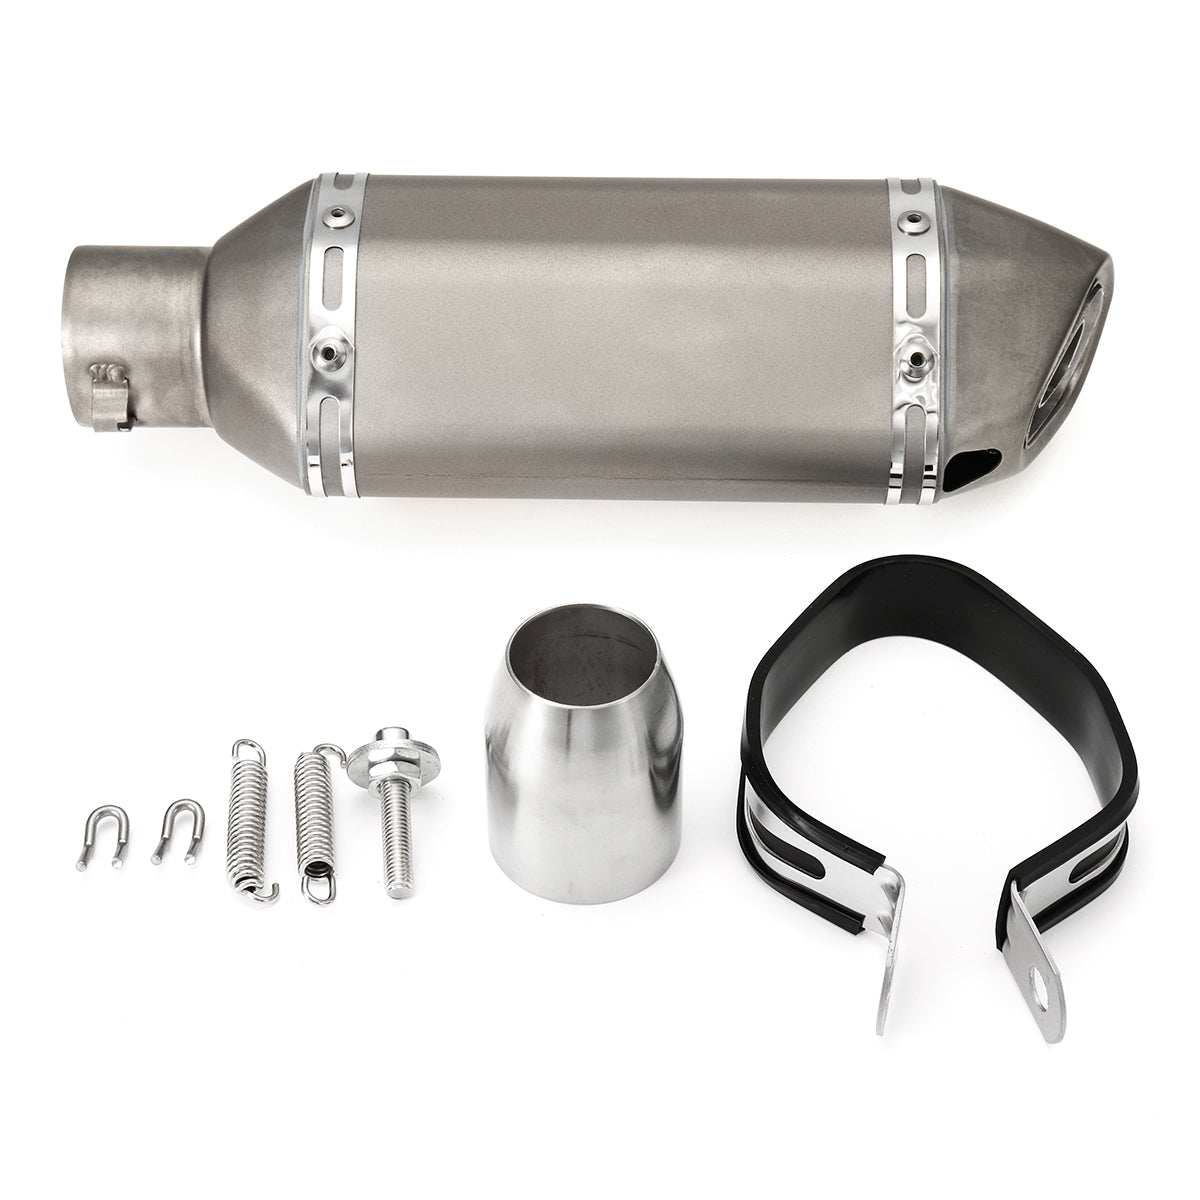 Gray 38-51mm Motorcycle Steel Short Exhaust Muffler Pipe With Removable Silencer Universal